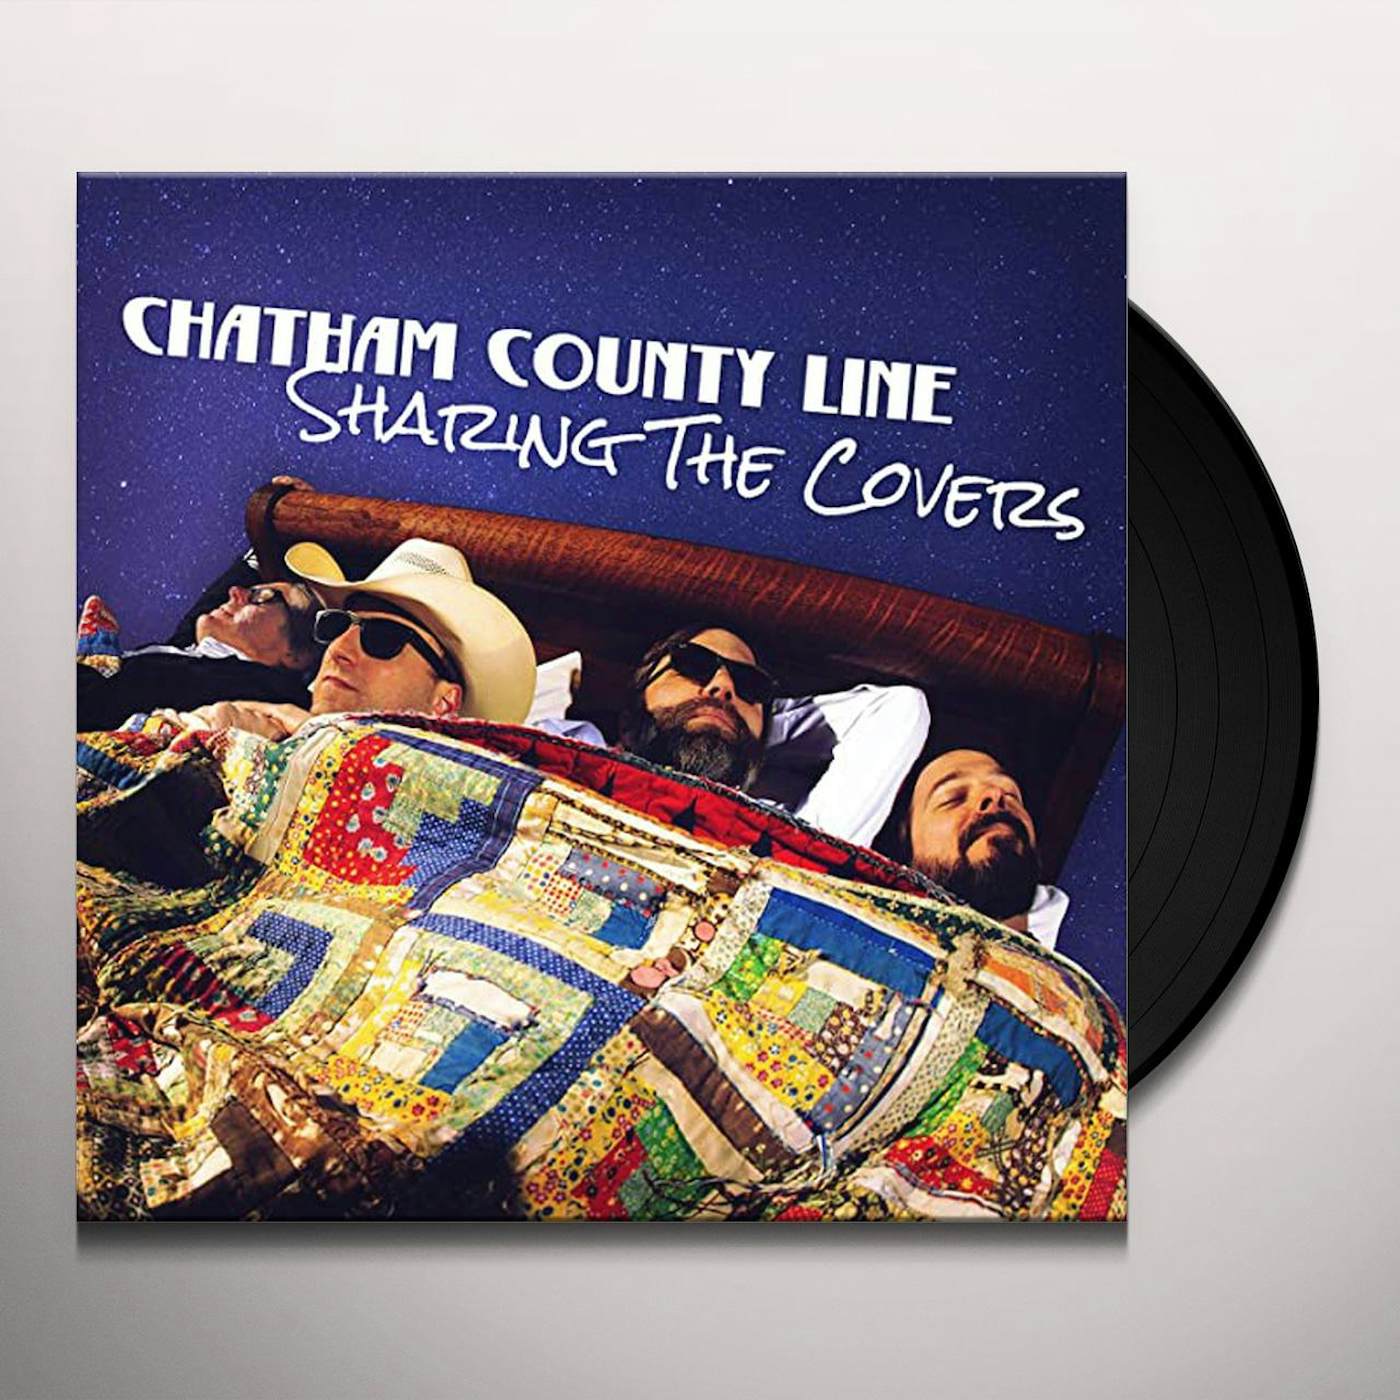 Chatham County Line Sharing the Covers Vinyl Record